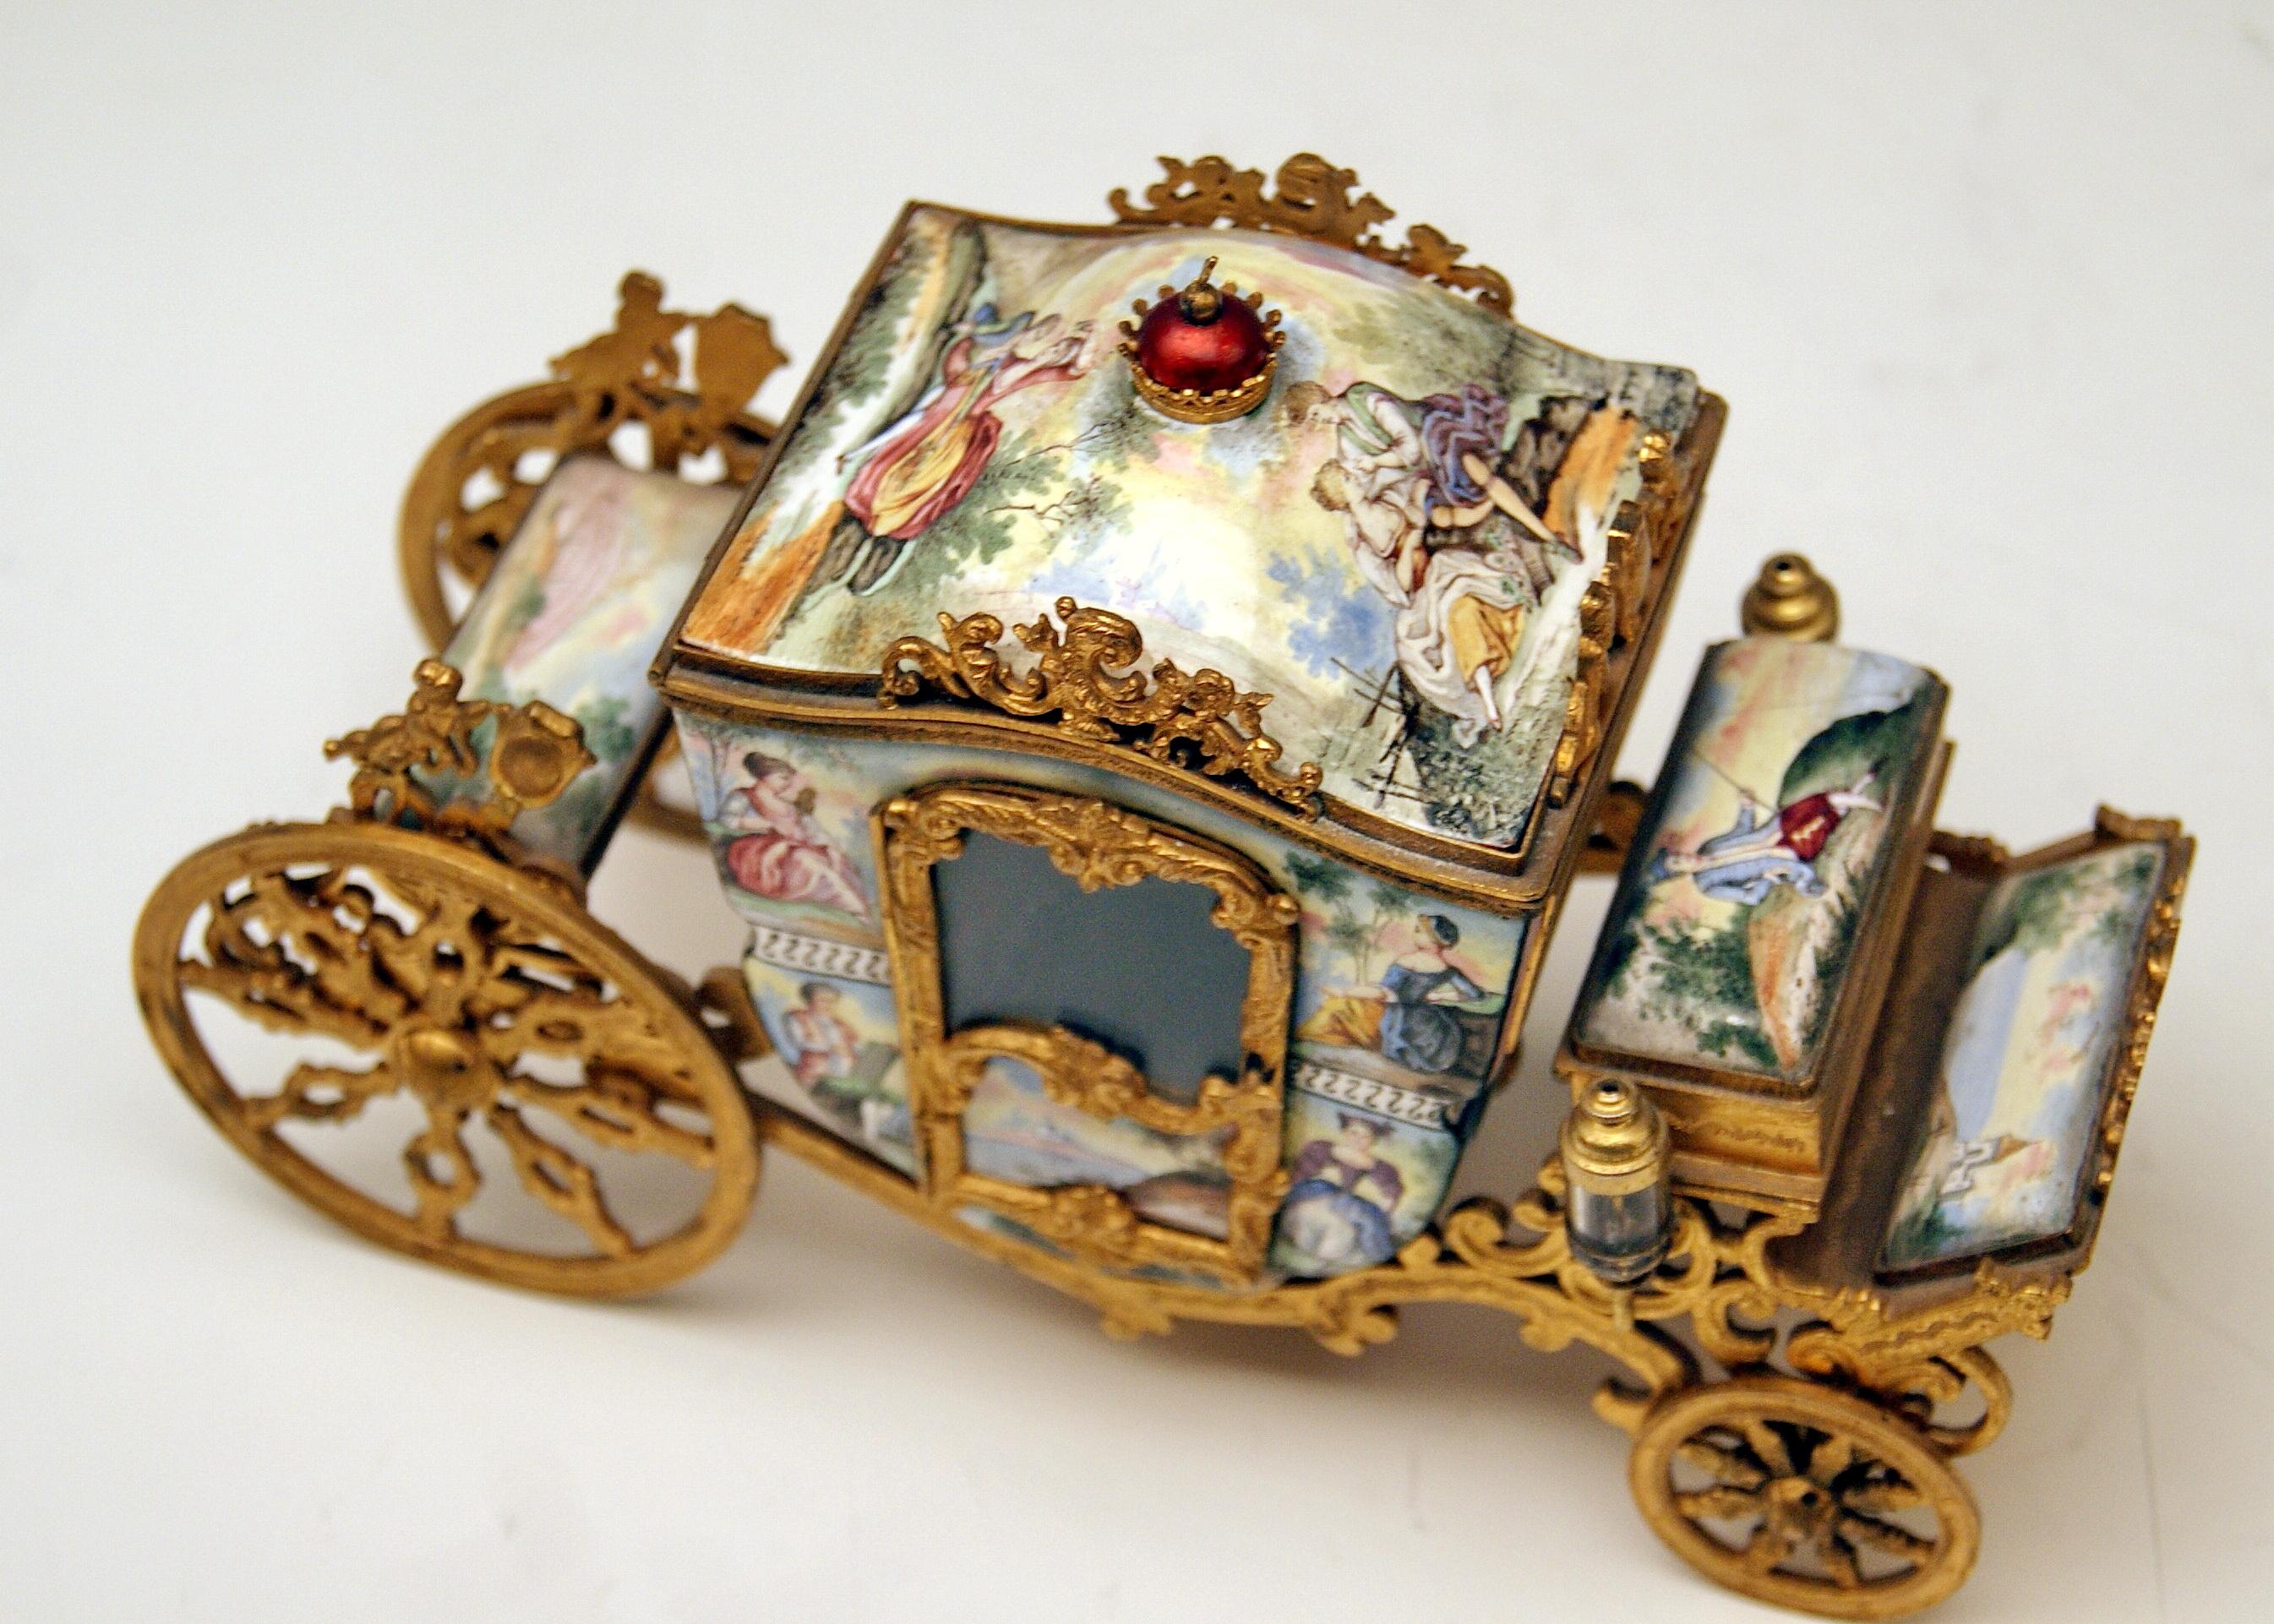 Vintage Viennese enamel item decorated with paintings and gilt bronze mountings:
Carriage on wheels with glassed doors

Specifications:
1. The surface of carriage is stunningly painted with enamel, showing couples situated in romantic